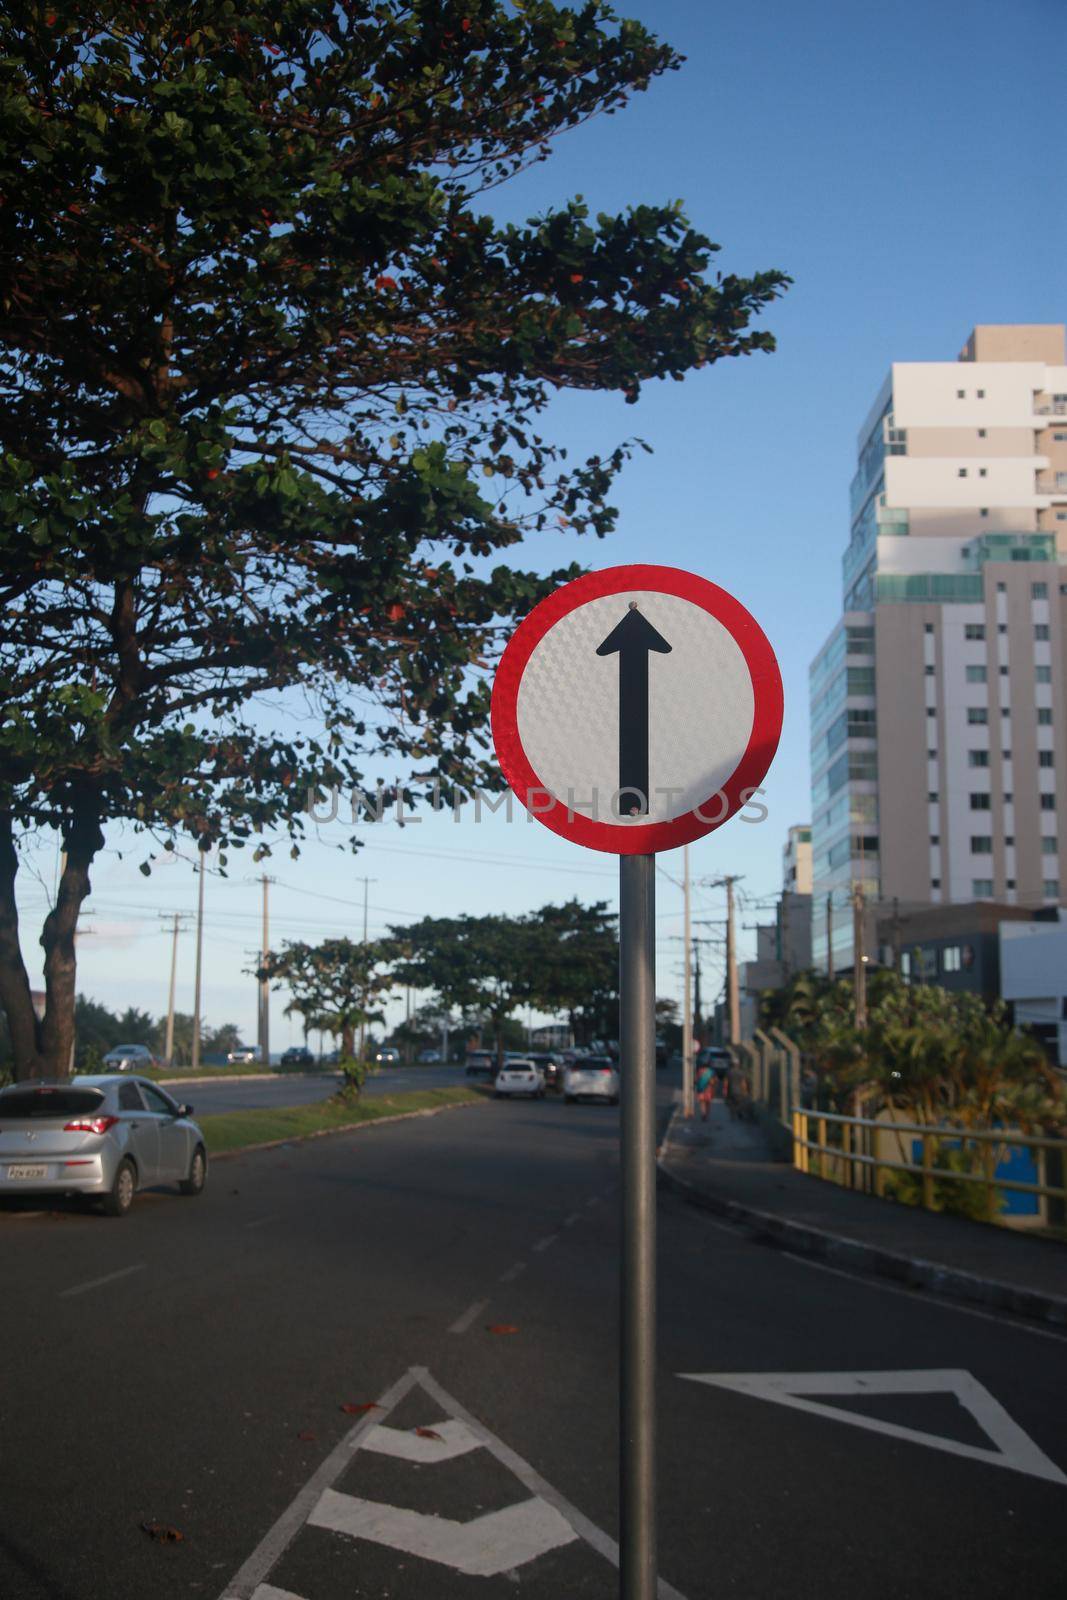 salvador, bahia, brazil - july 19, 2022: traffic signs indicating one-way traffic on a street in the city of Salvador